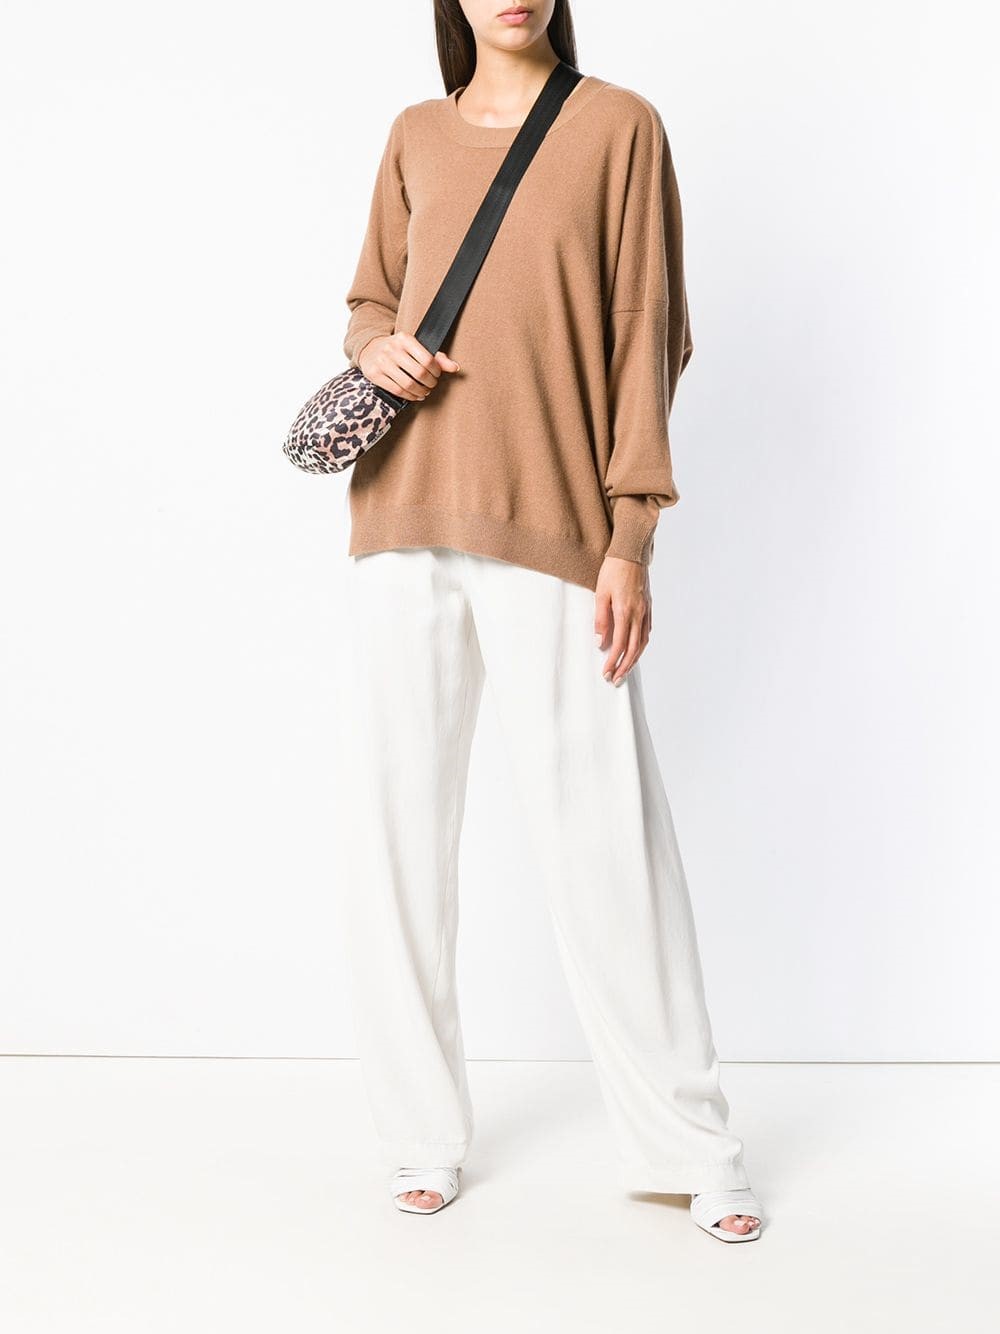 stella mccartney PULLOVER available on montiboutique.com - 24709